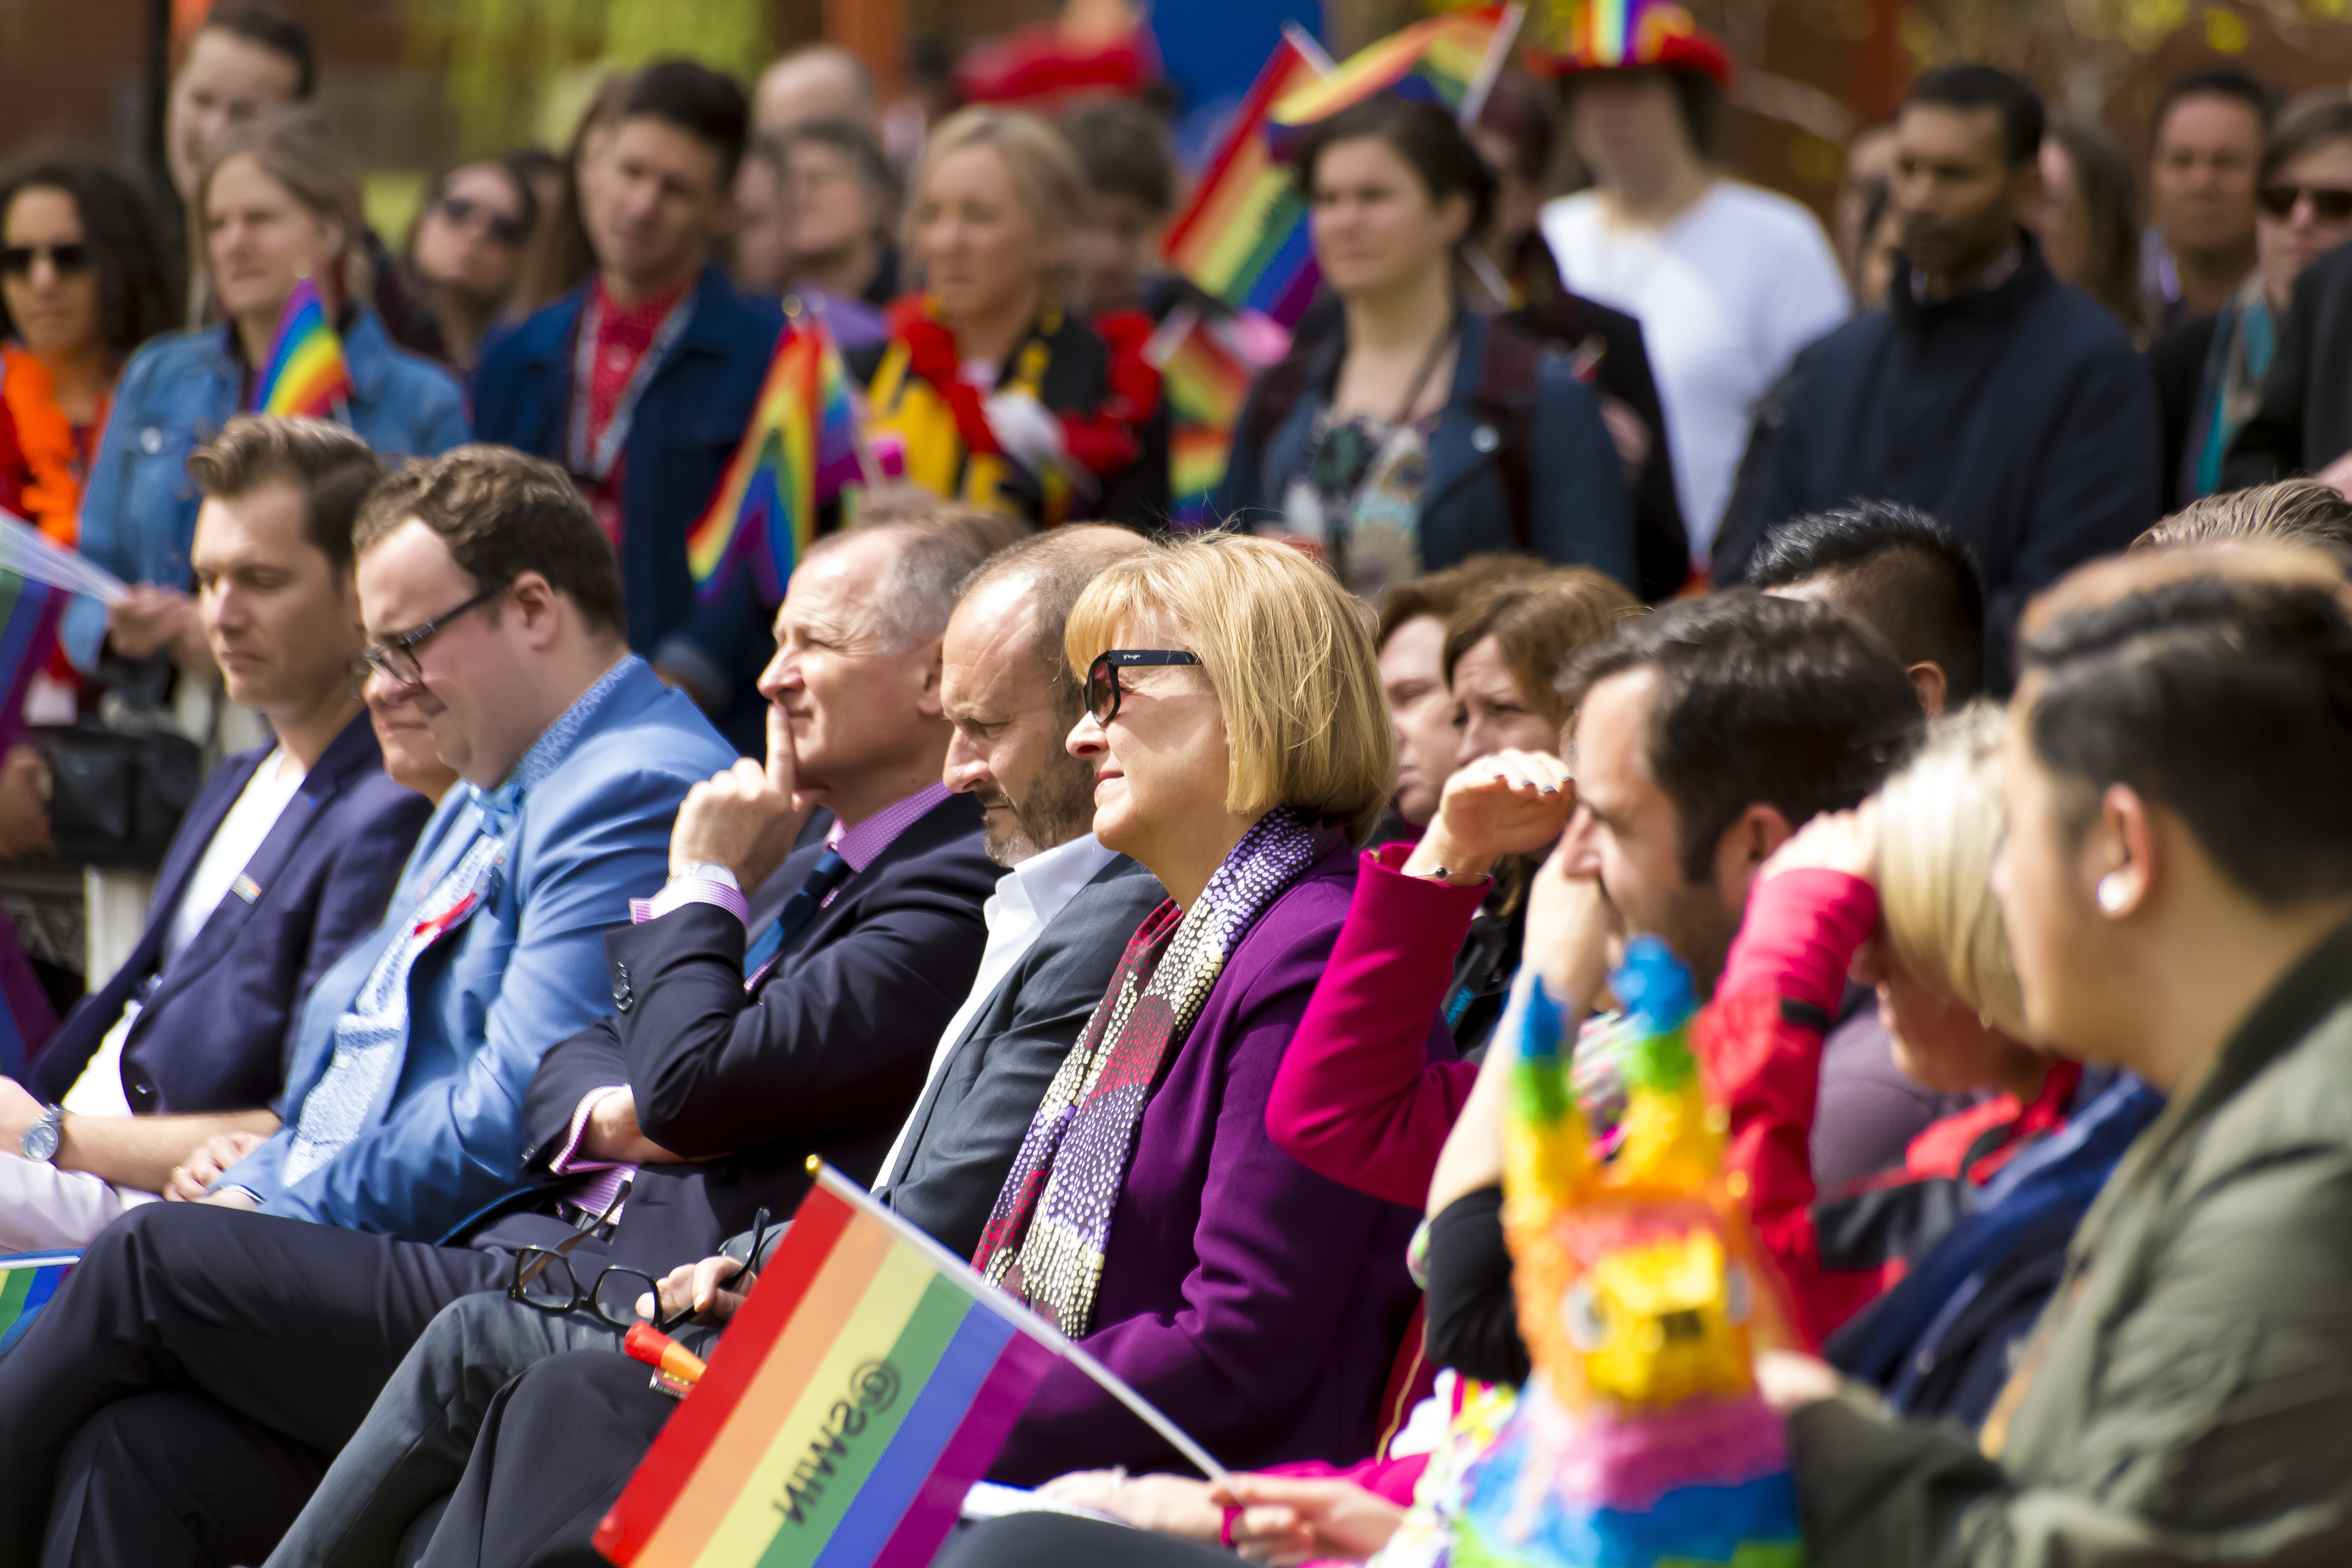 A crowd of people hold rainbow flags as they attend the Pride Day event held on campus 